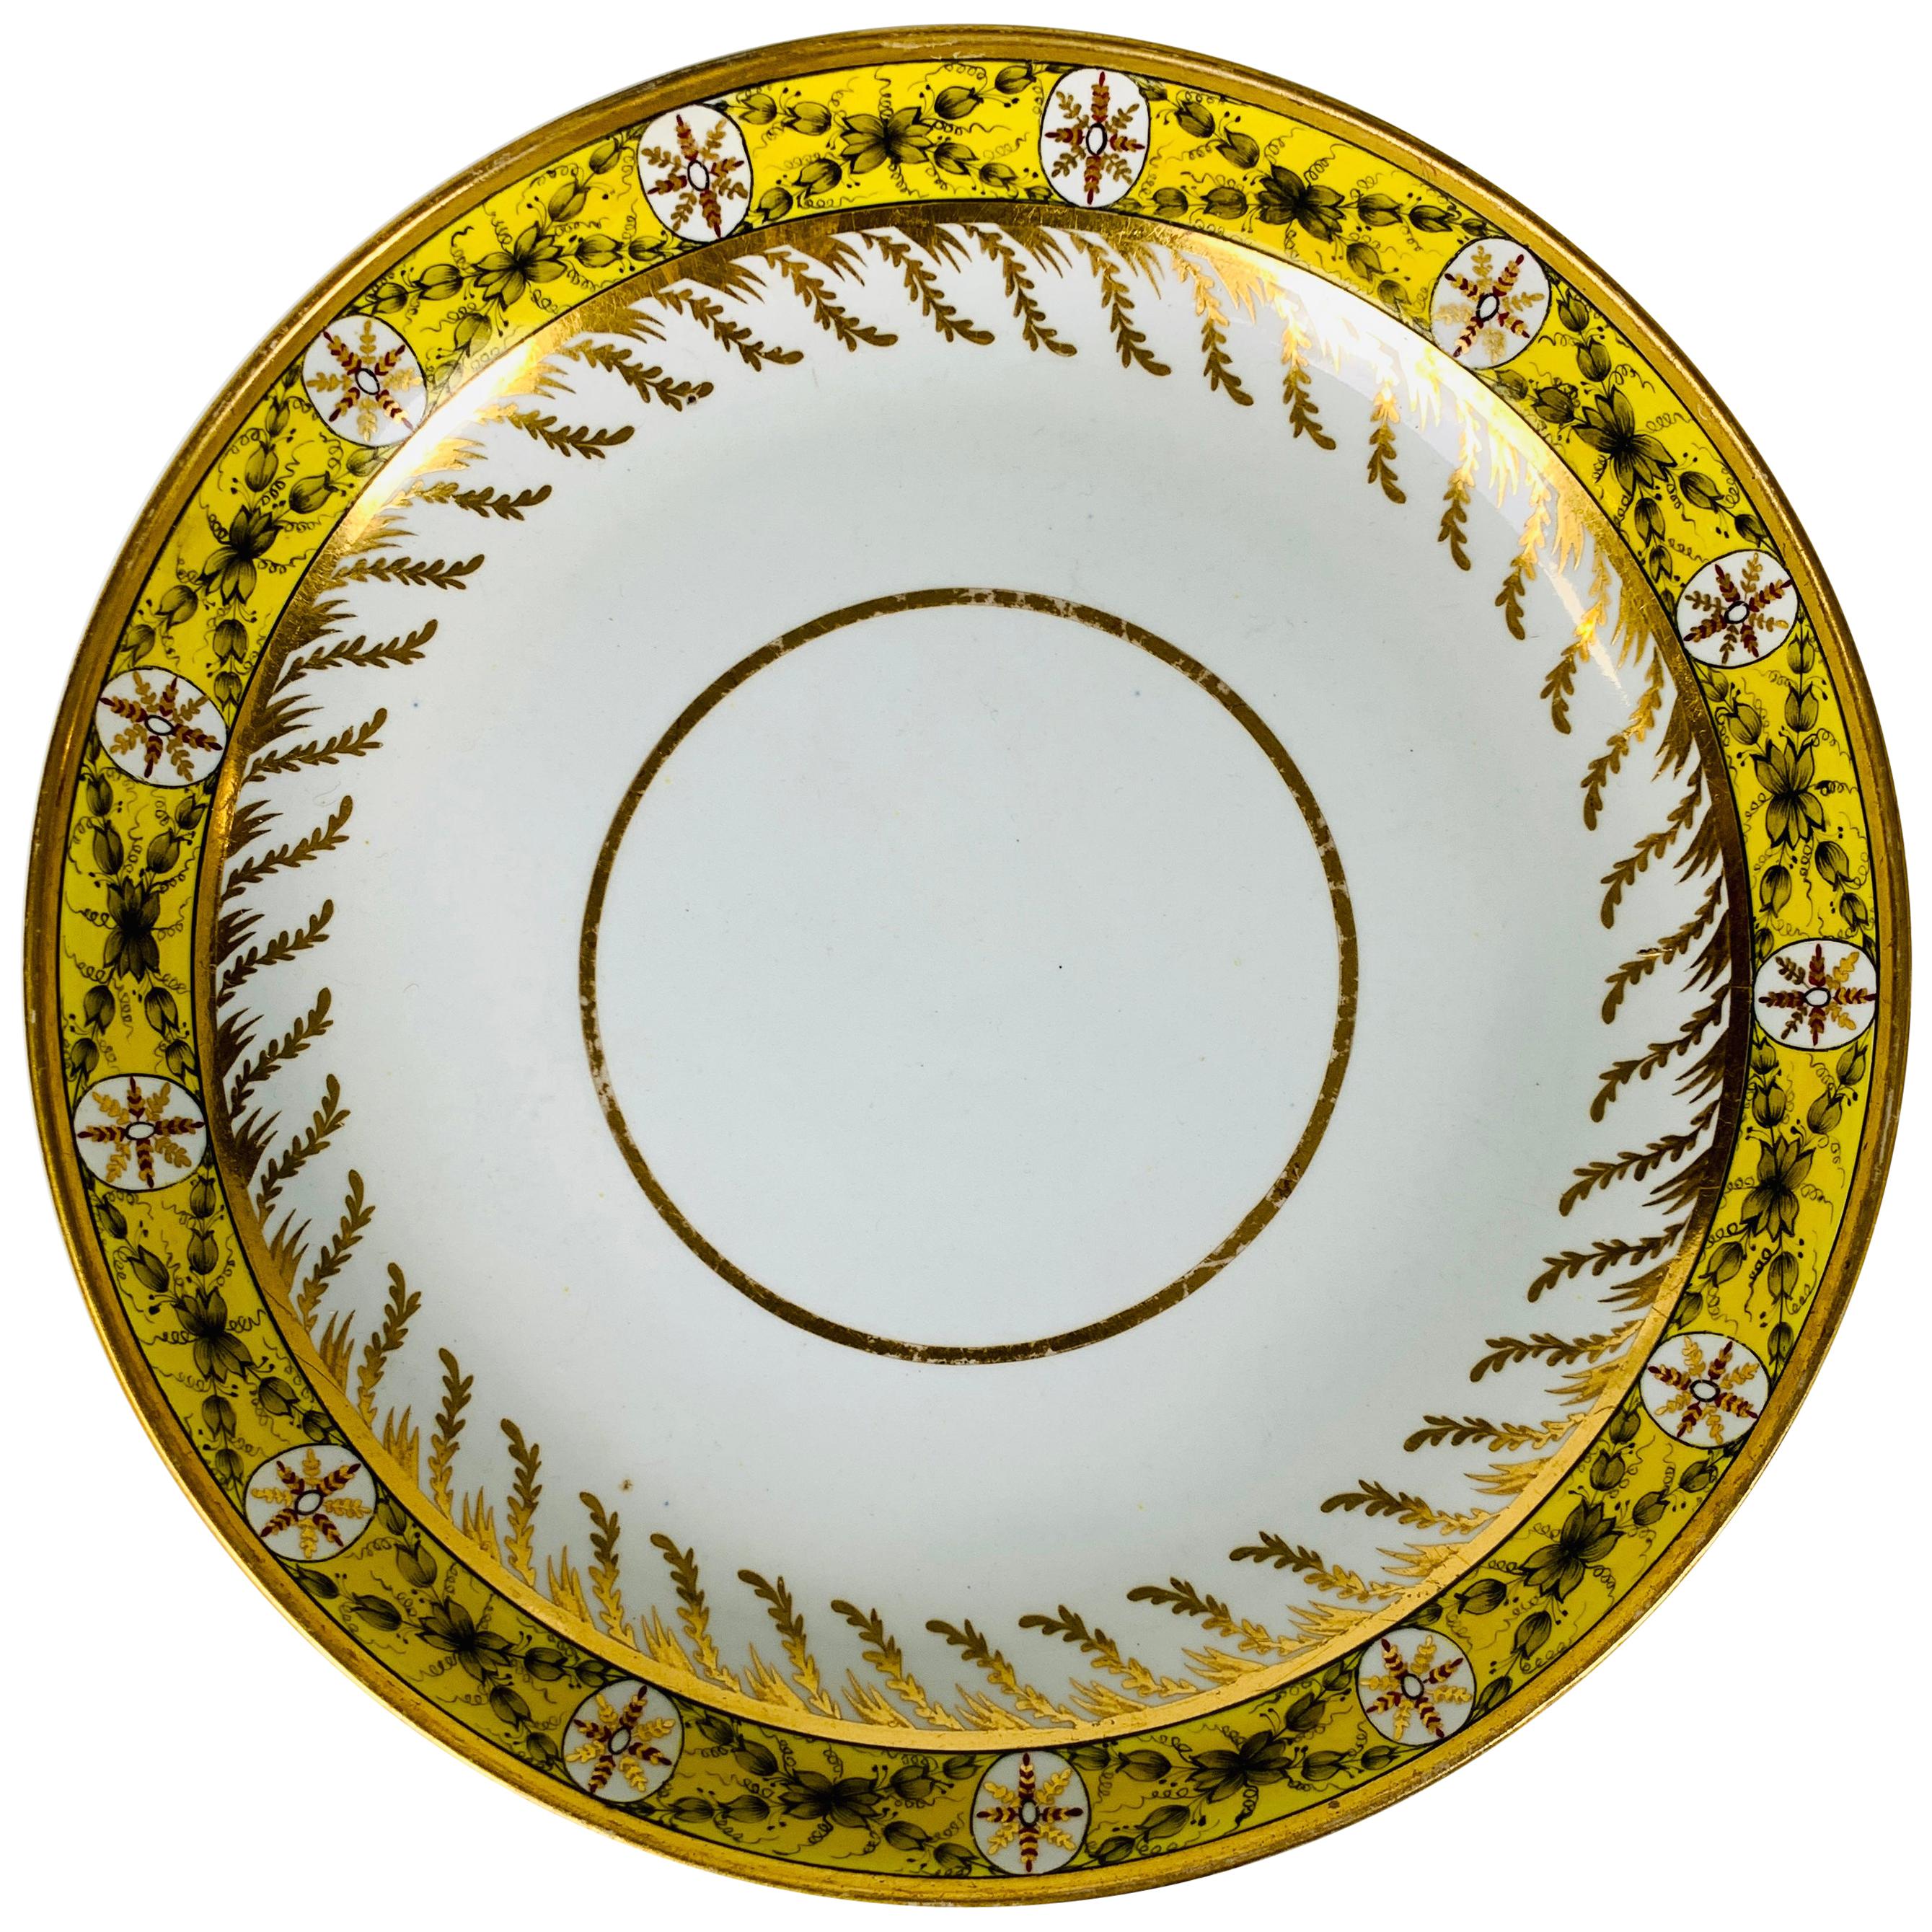 Yellow English Porcelain Dish with Neoclassical Design Circa 1800